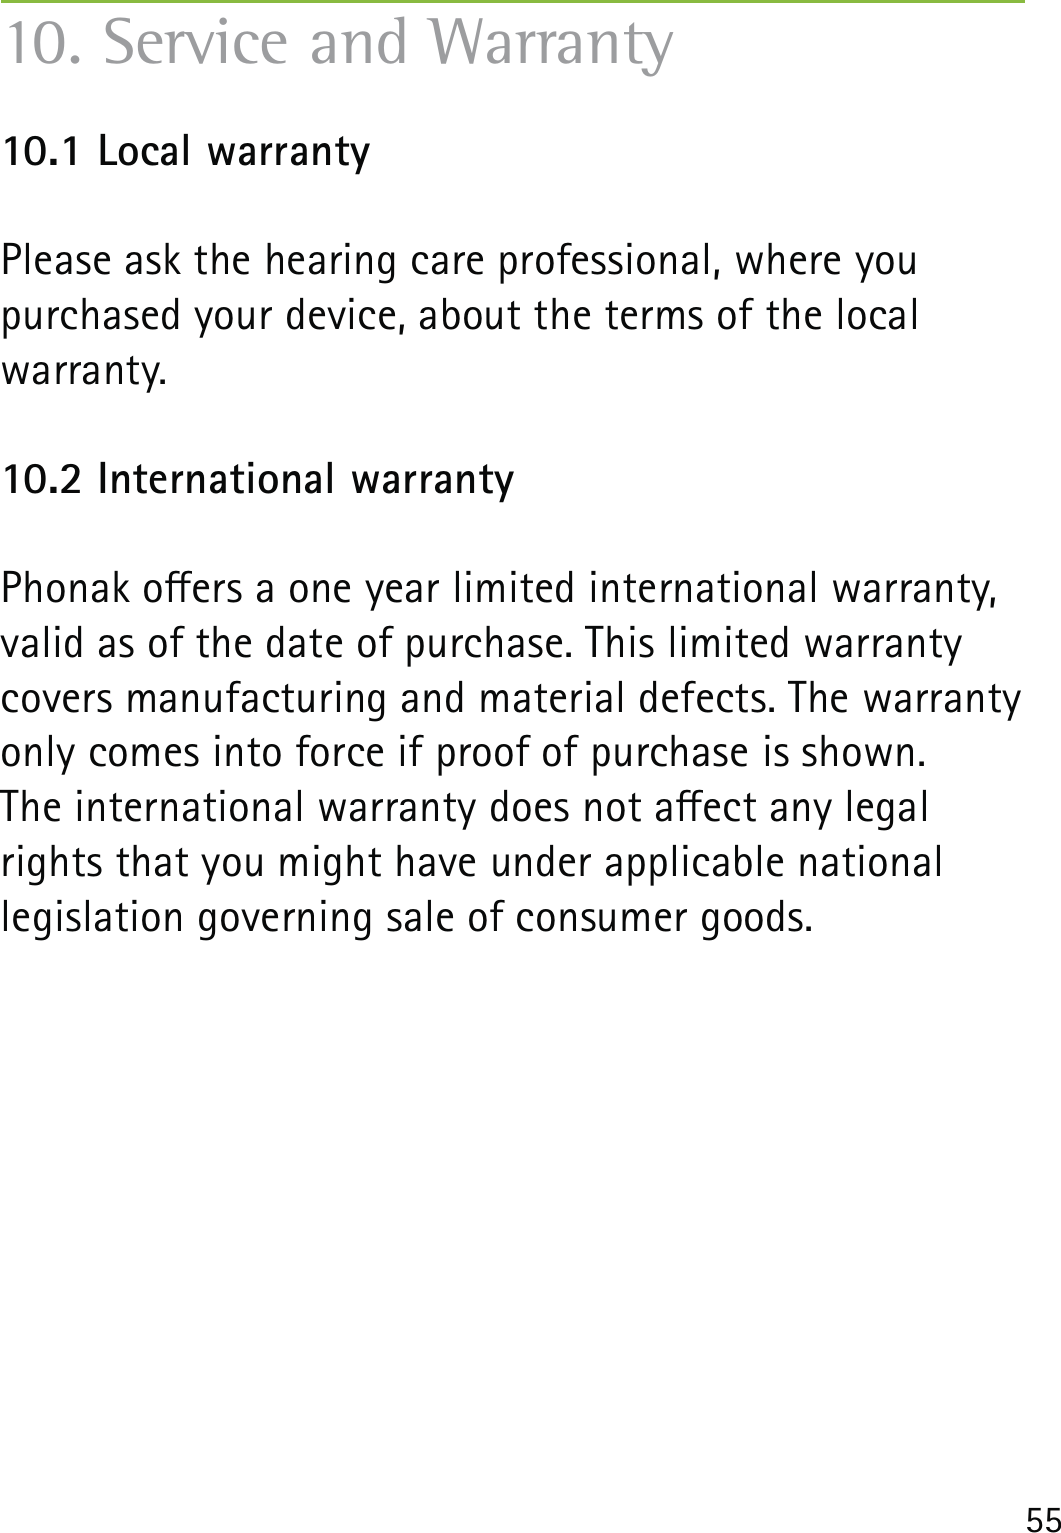 5510. Service and Warranty10.1 Local warrantyPlease ask the hearing care professional, where you purchased your device, about the terms of the local warranty.10.2 International warrantyPhonak oers a one year limited international warranty, valid as of the date of purchase. This limited warranty covers manufacturing and material defects. The warranty only comes into force if proof of purchase is shown.The international warranty does not aect any legal rights that you might have under applicable national legislation governing sale of consumer goods.